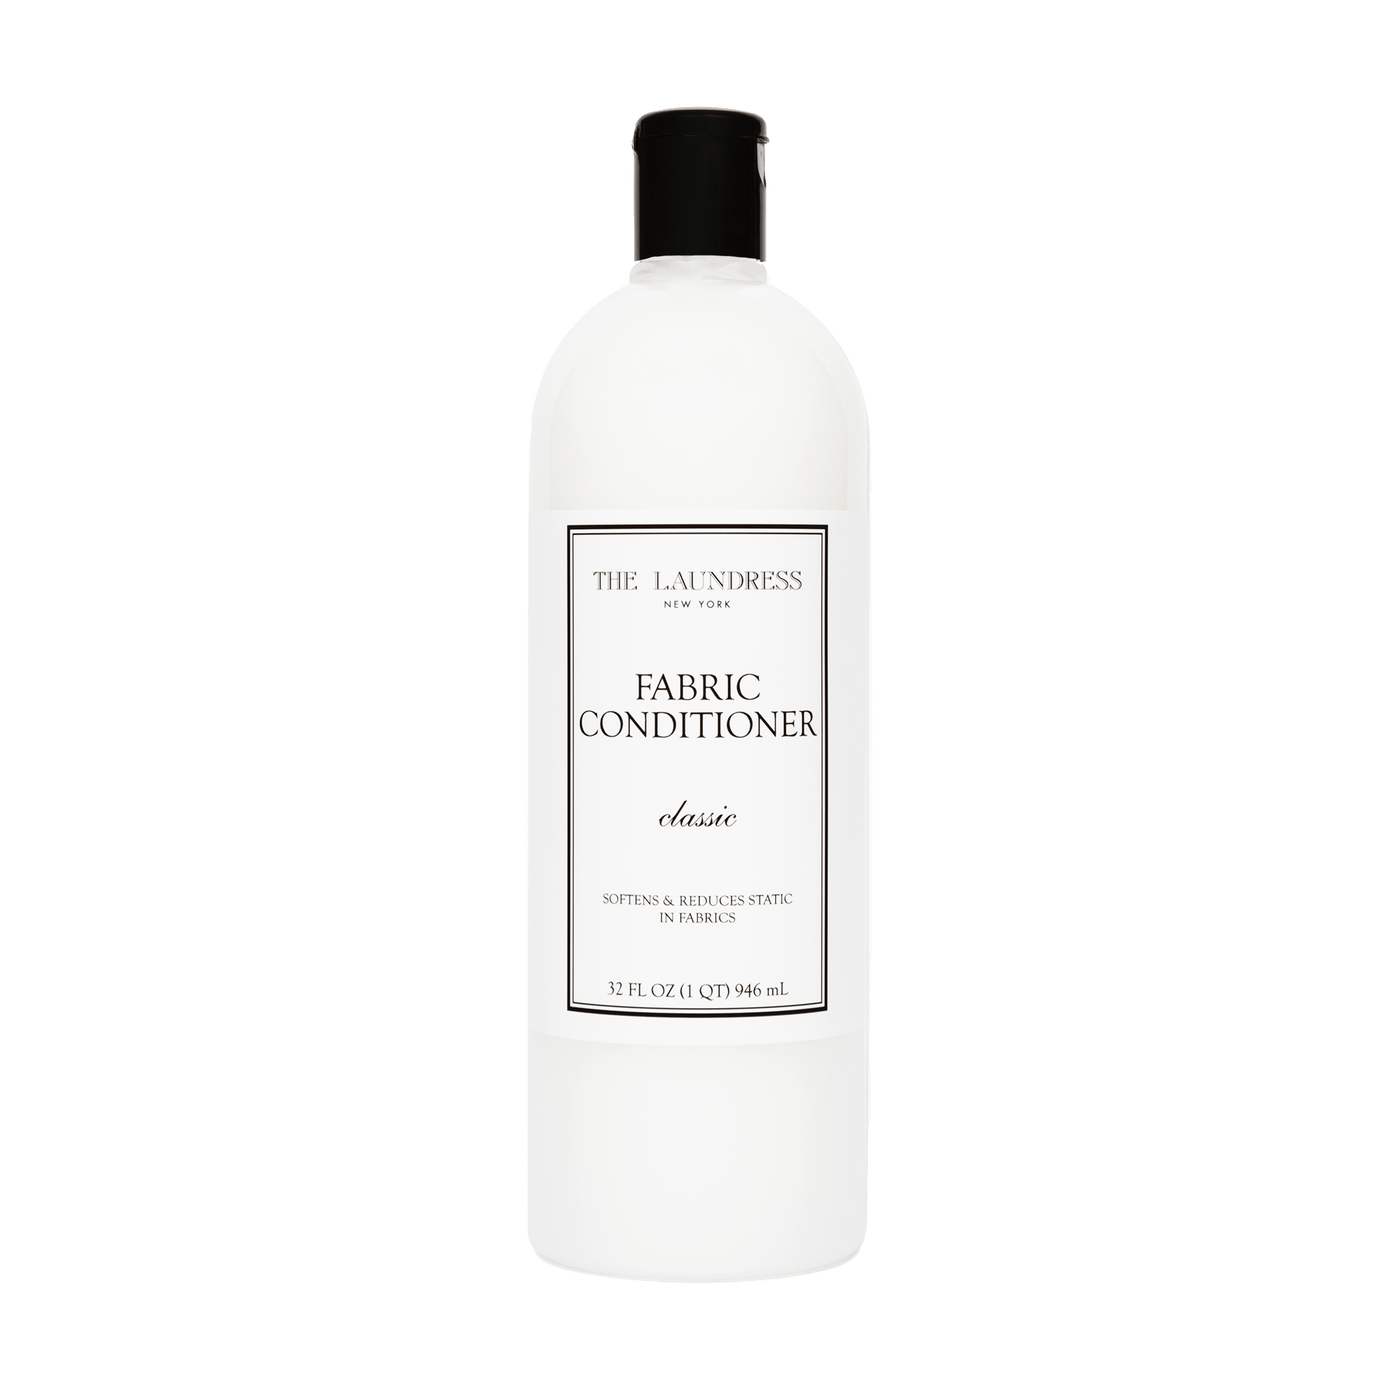 The Laundress Fabric Conditioner Classic which softens & reduces static in fabrics.